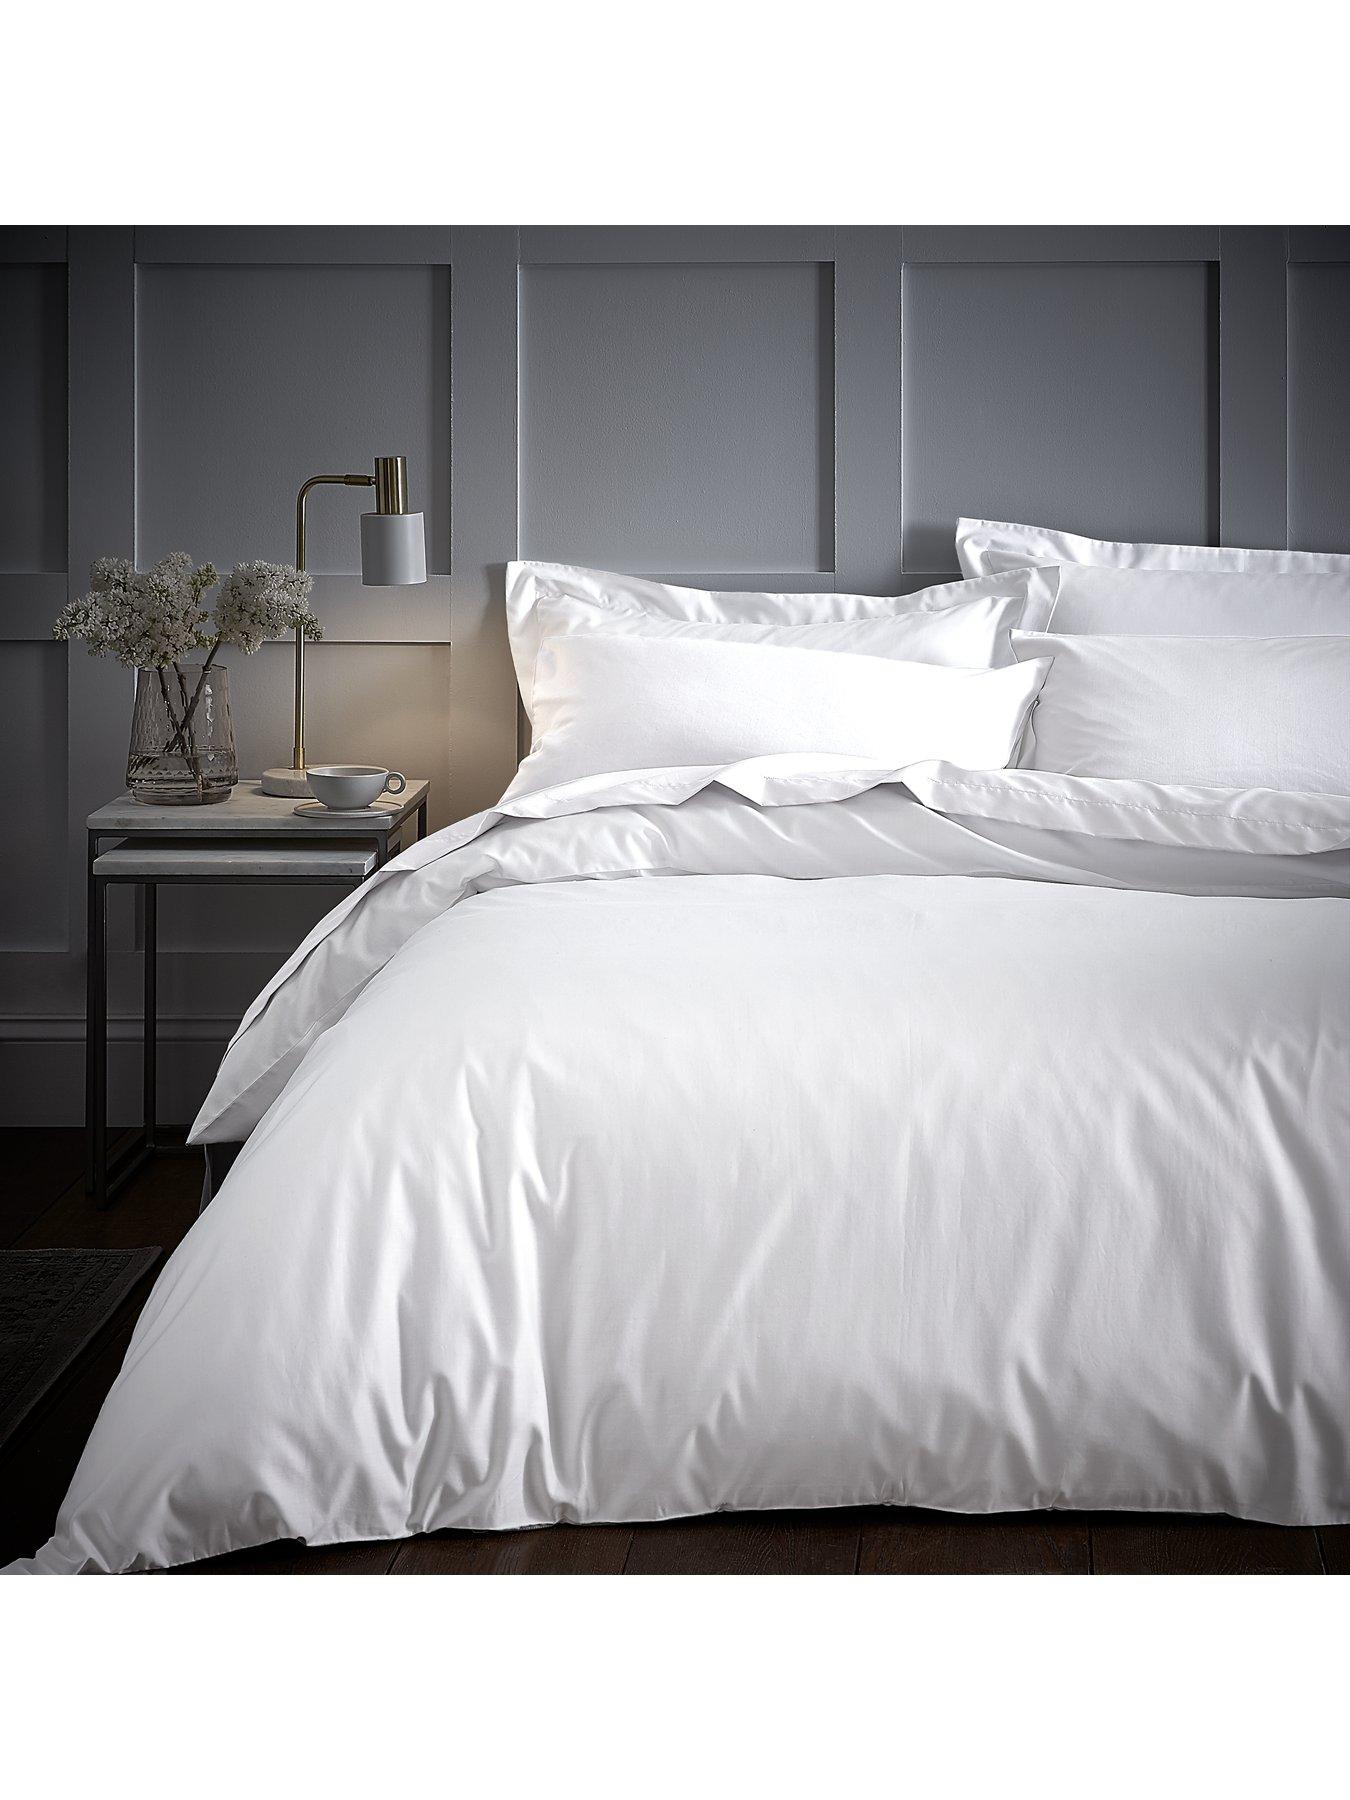 King 5ft Content By Terence Conran Duvet Covers Bedding